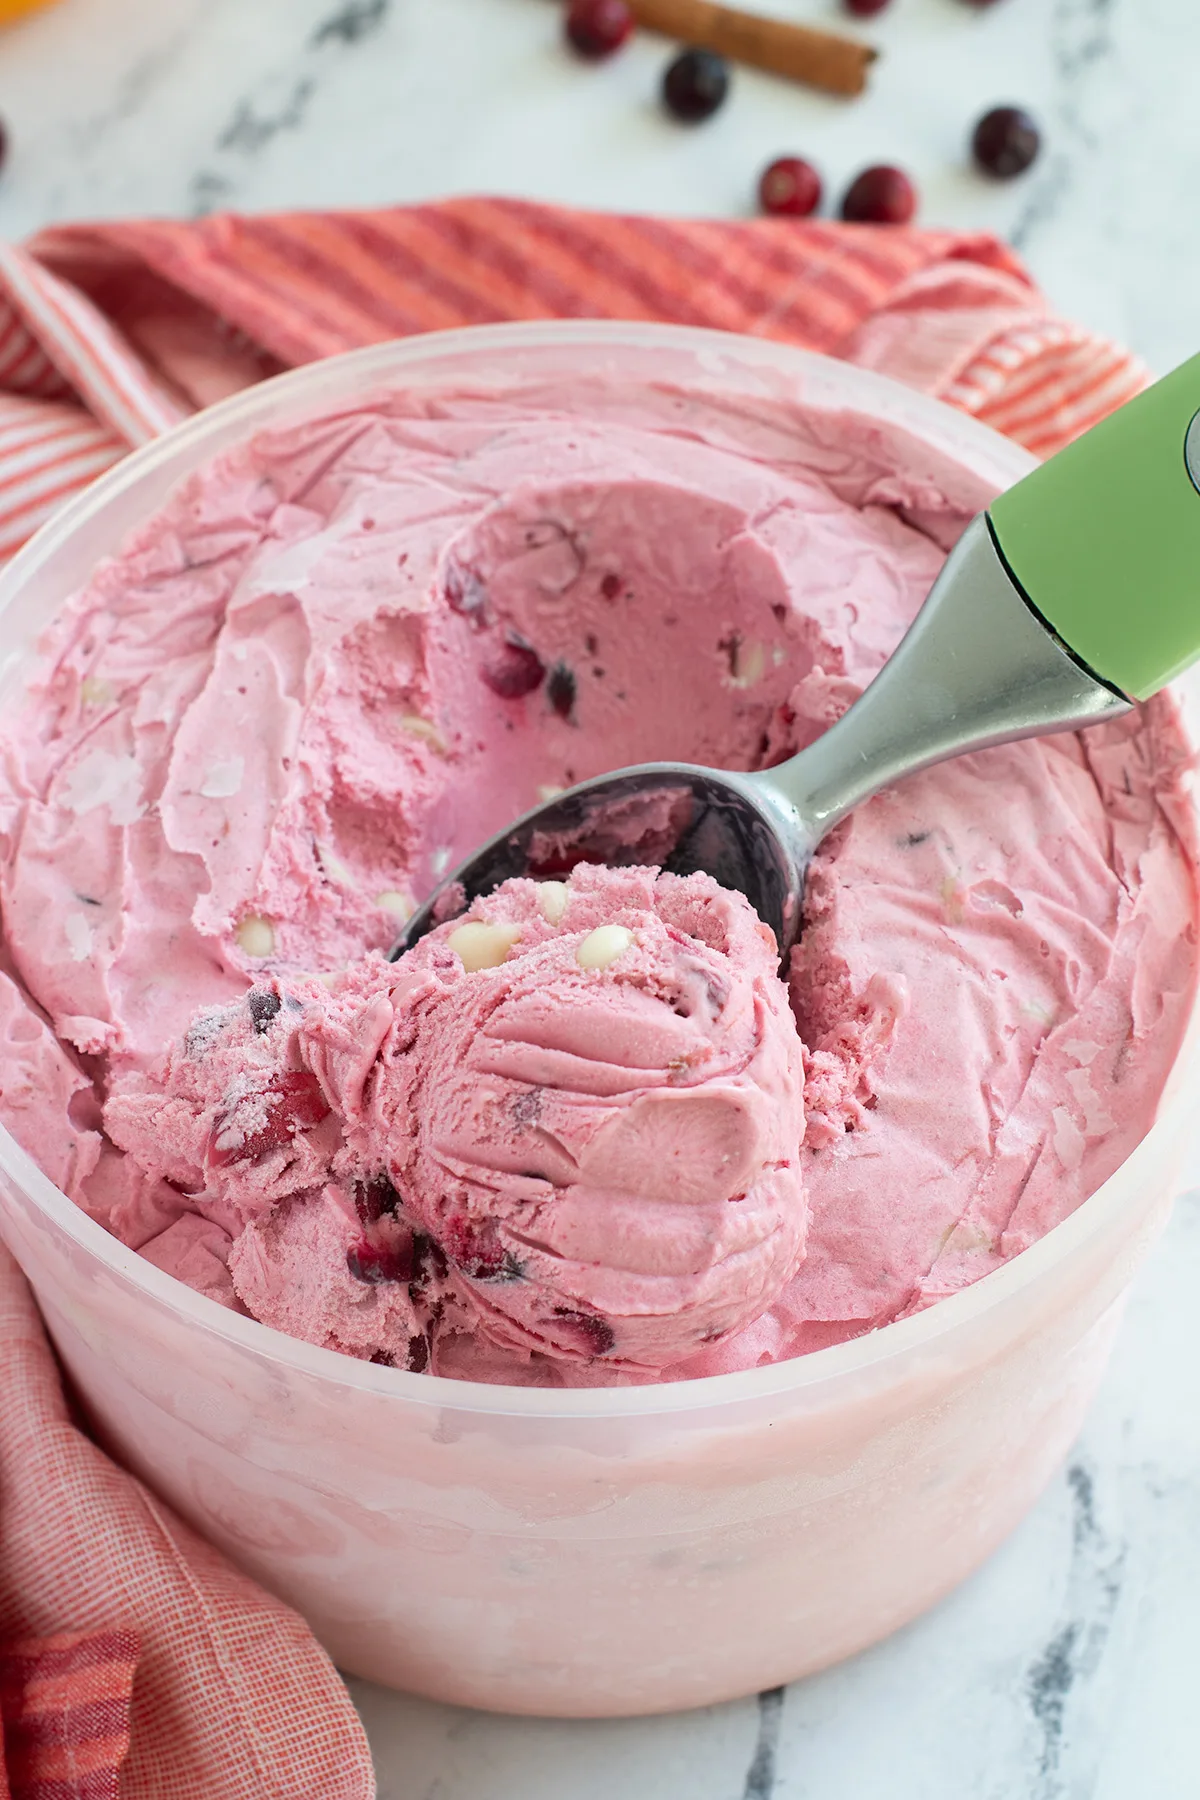 a bucket of cranberry ice cream with a green scooper.